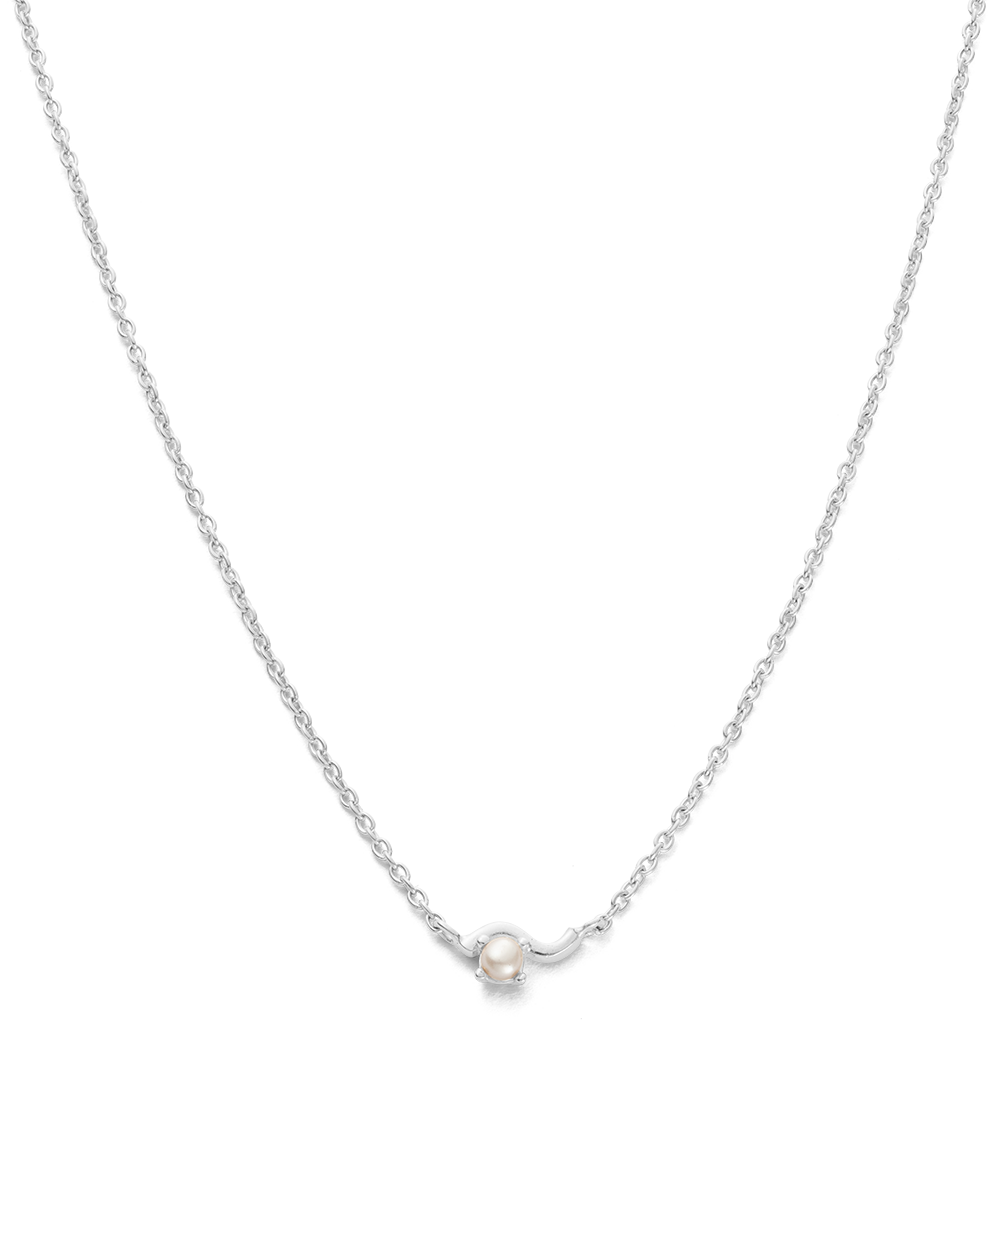 RIPPLE NECKLACE (STERLING SILVER)